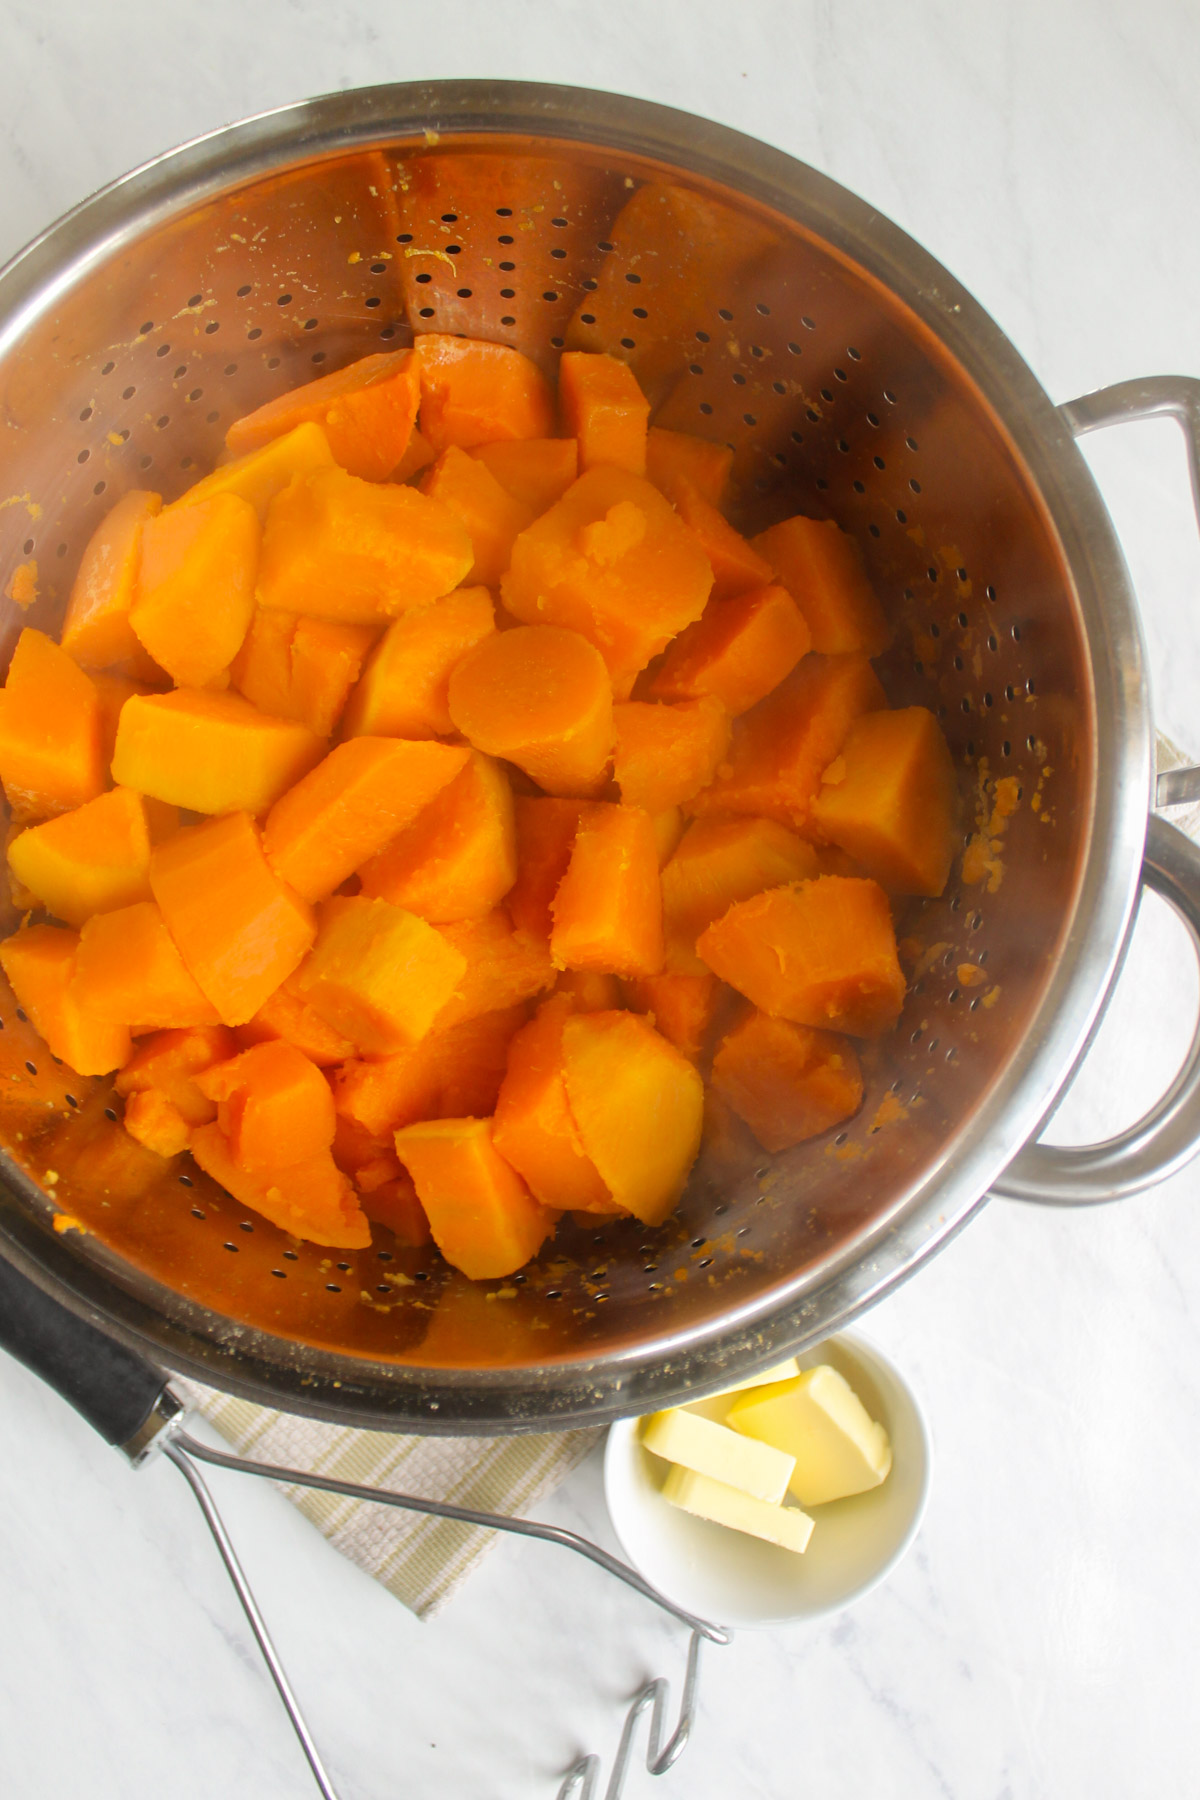 The boiled sweet potatoes drained in a colander.